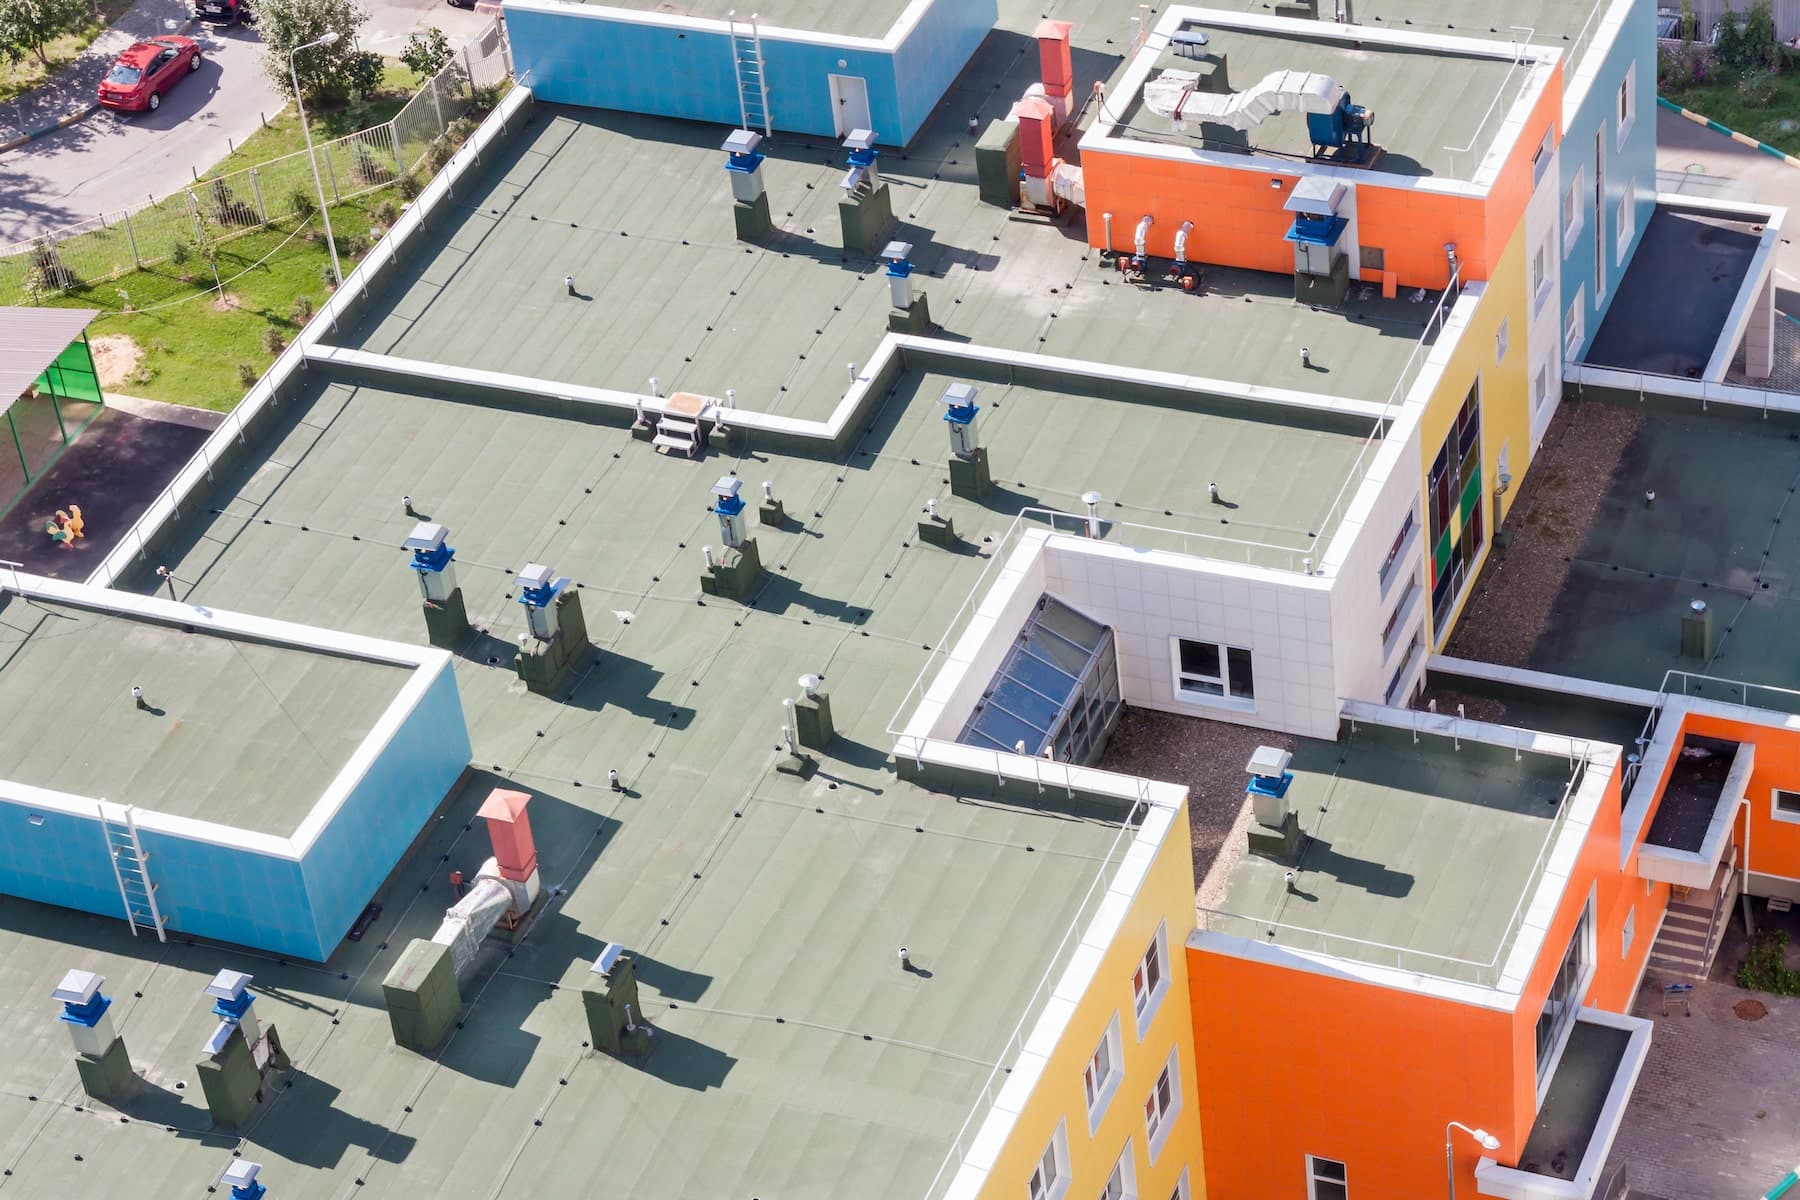 Tips to extend the life of your commercial roofing system